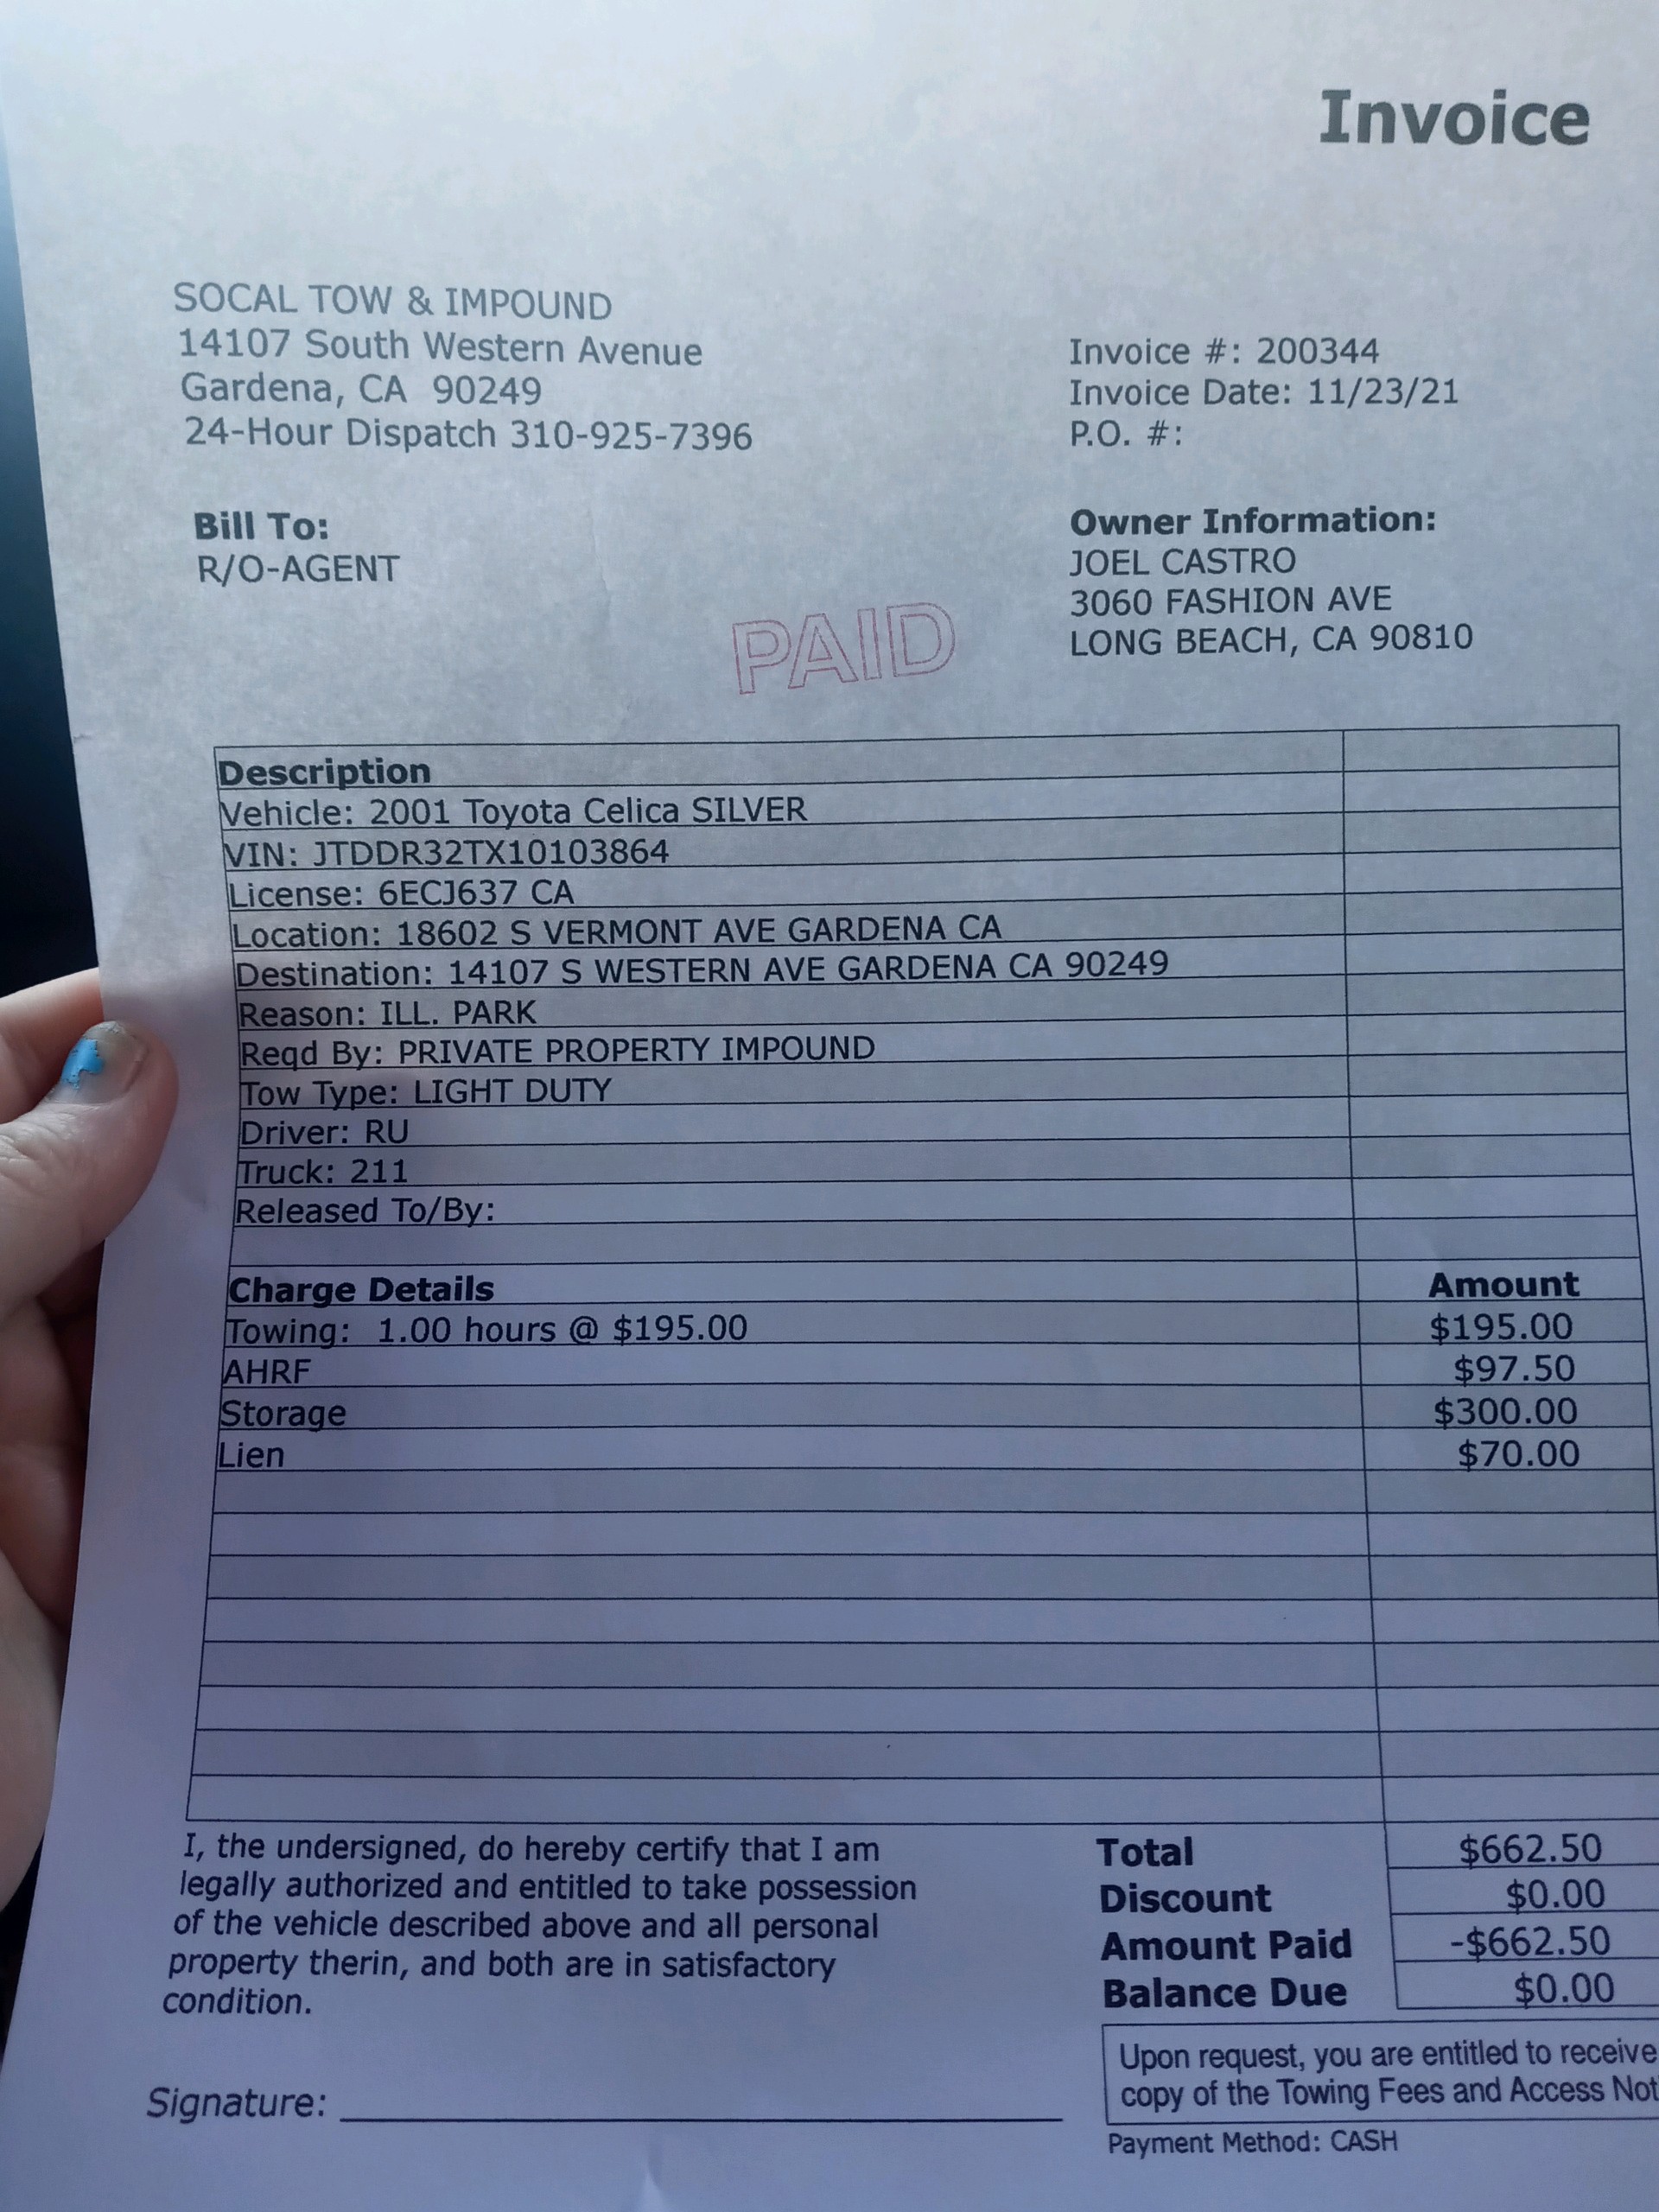 Receipt for Illegal tow 5 days $662